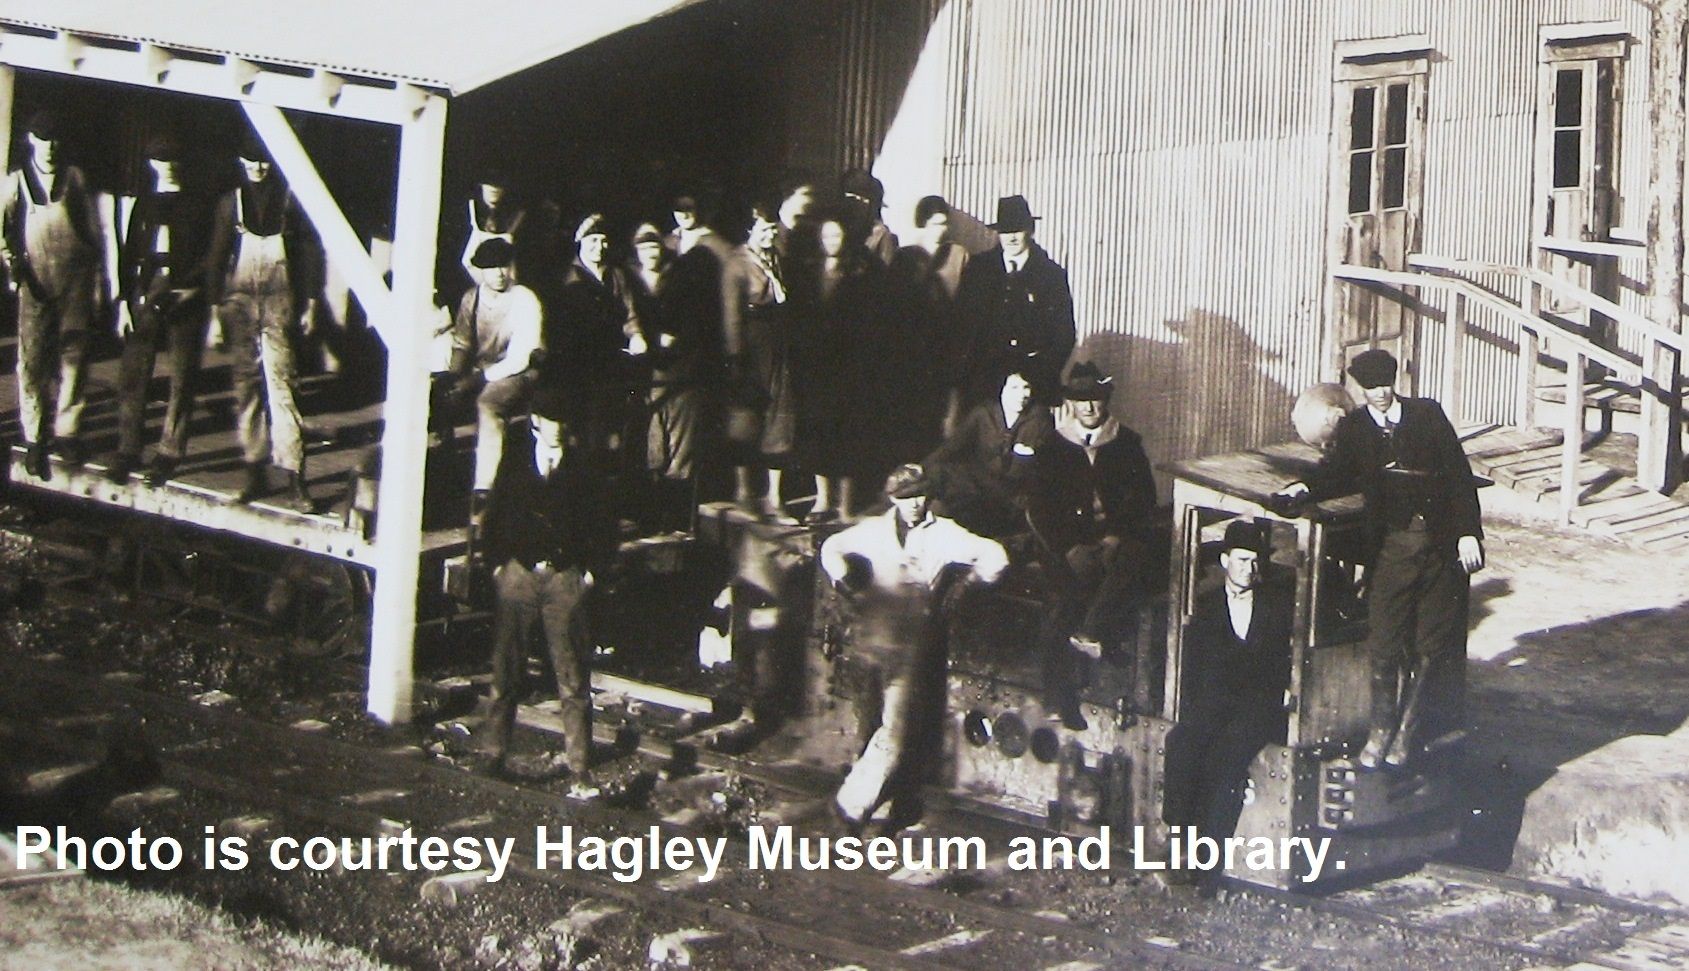 Thanks to Hagley Museum and Library, we have many wonderful images from Penniman, but no names. 